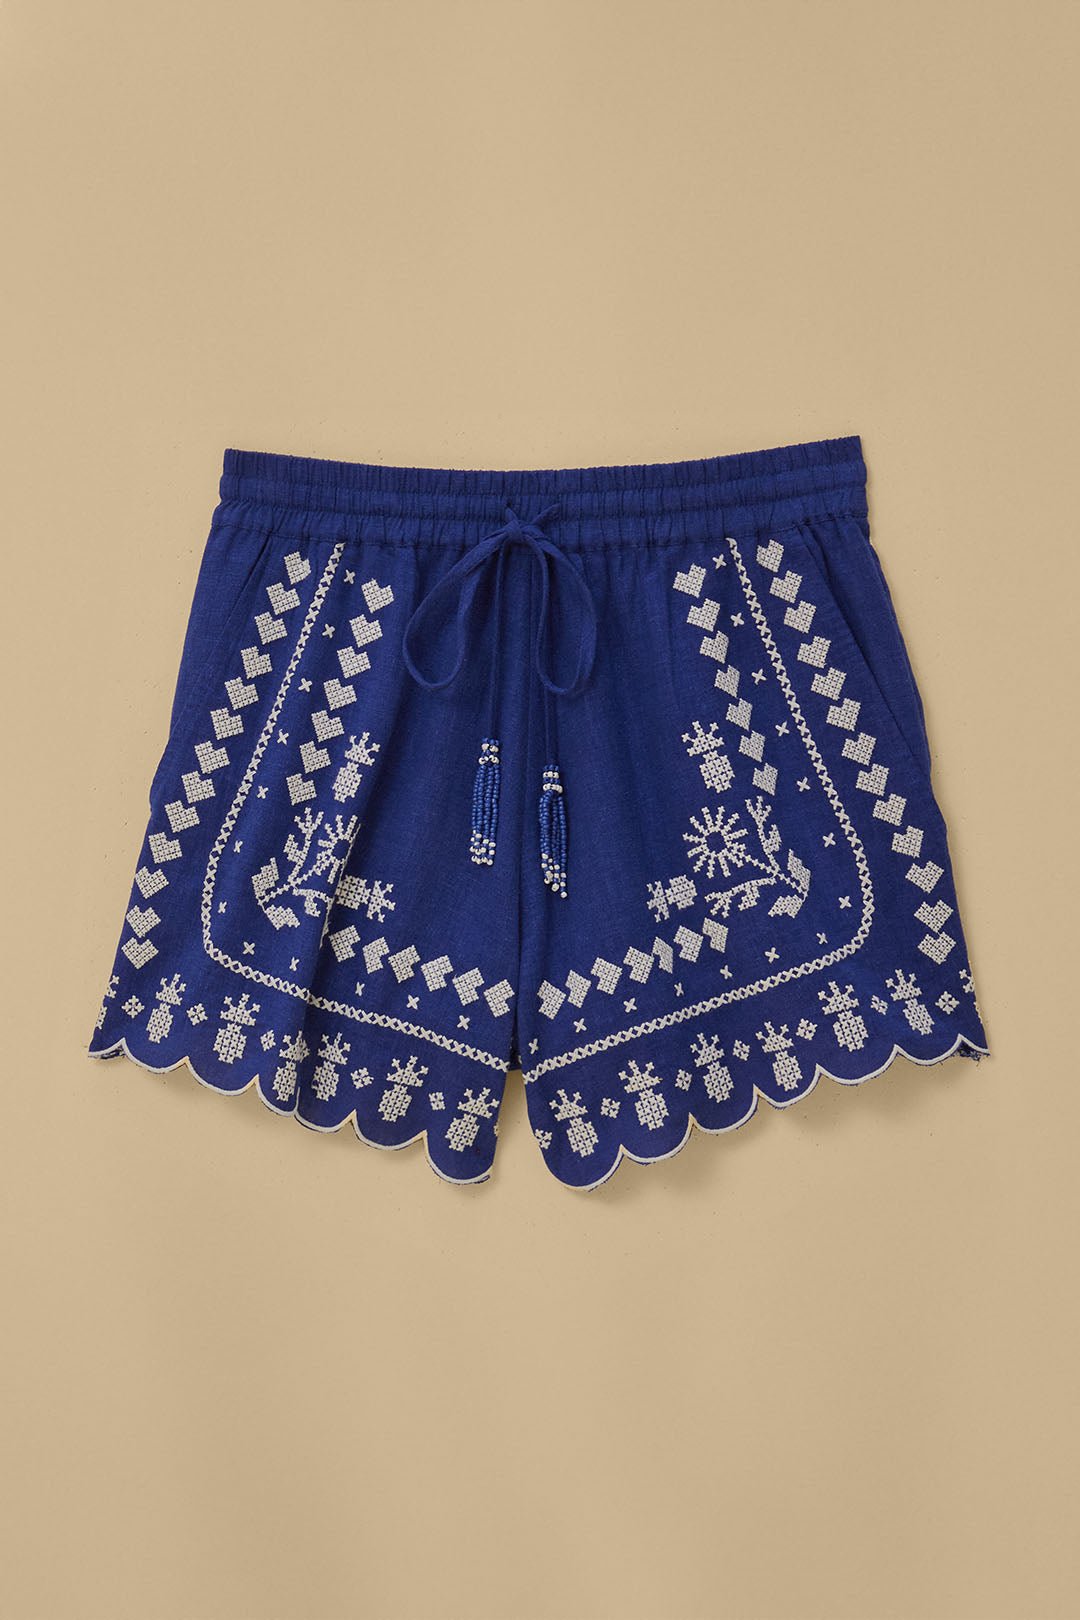 Navy Blue Embroidered Shorts - Frock Shop